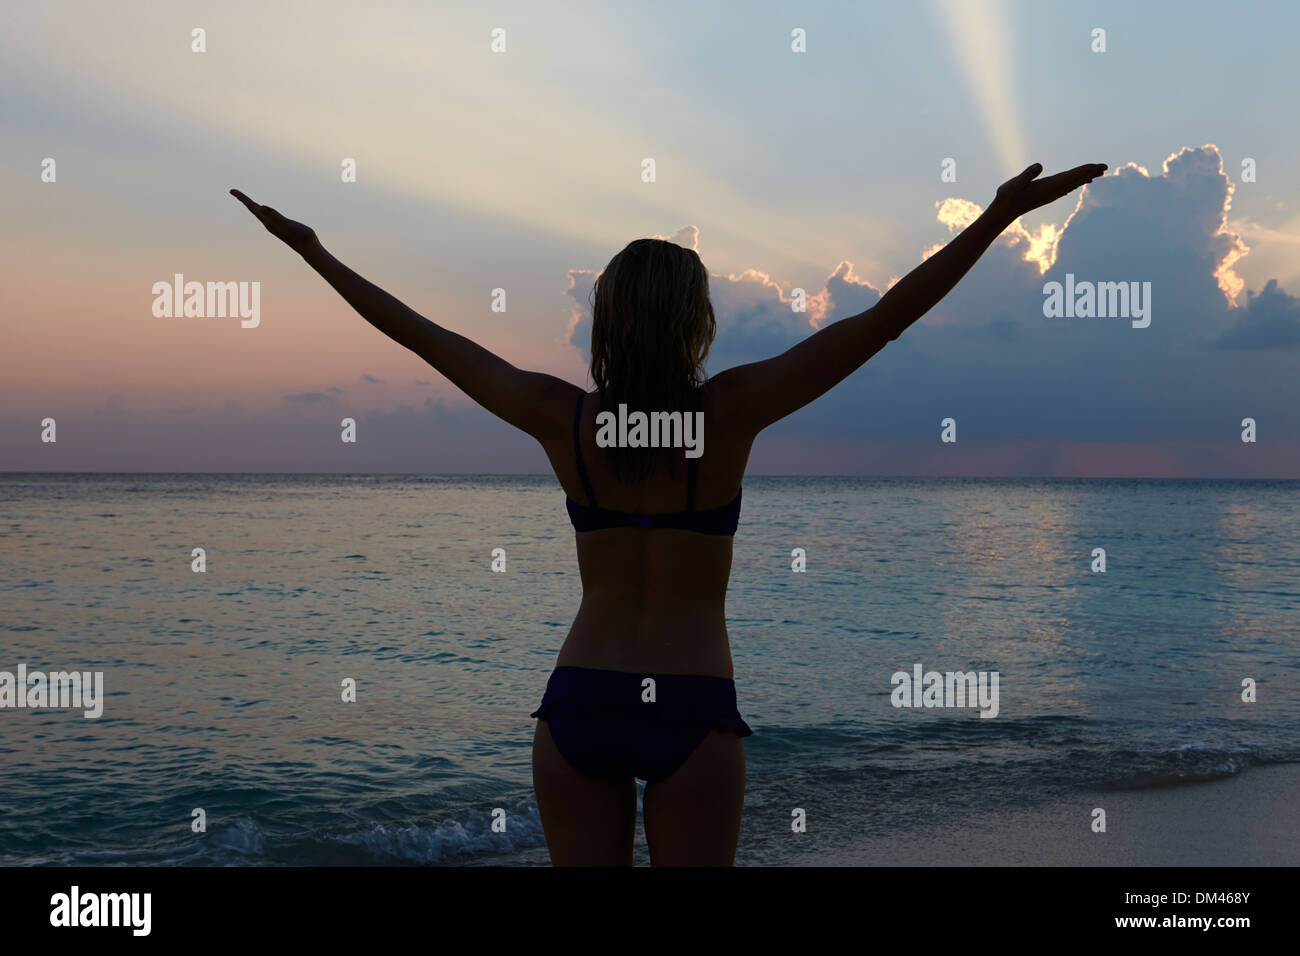 Silhouette Of Woman With Outstretched Arms On Beach Stock Photo